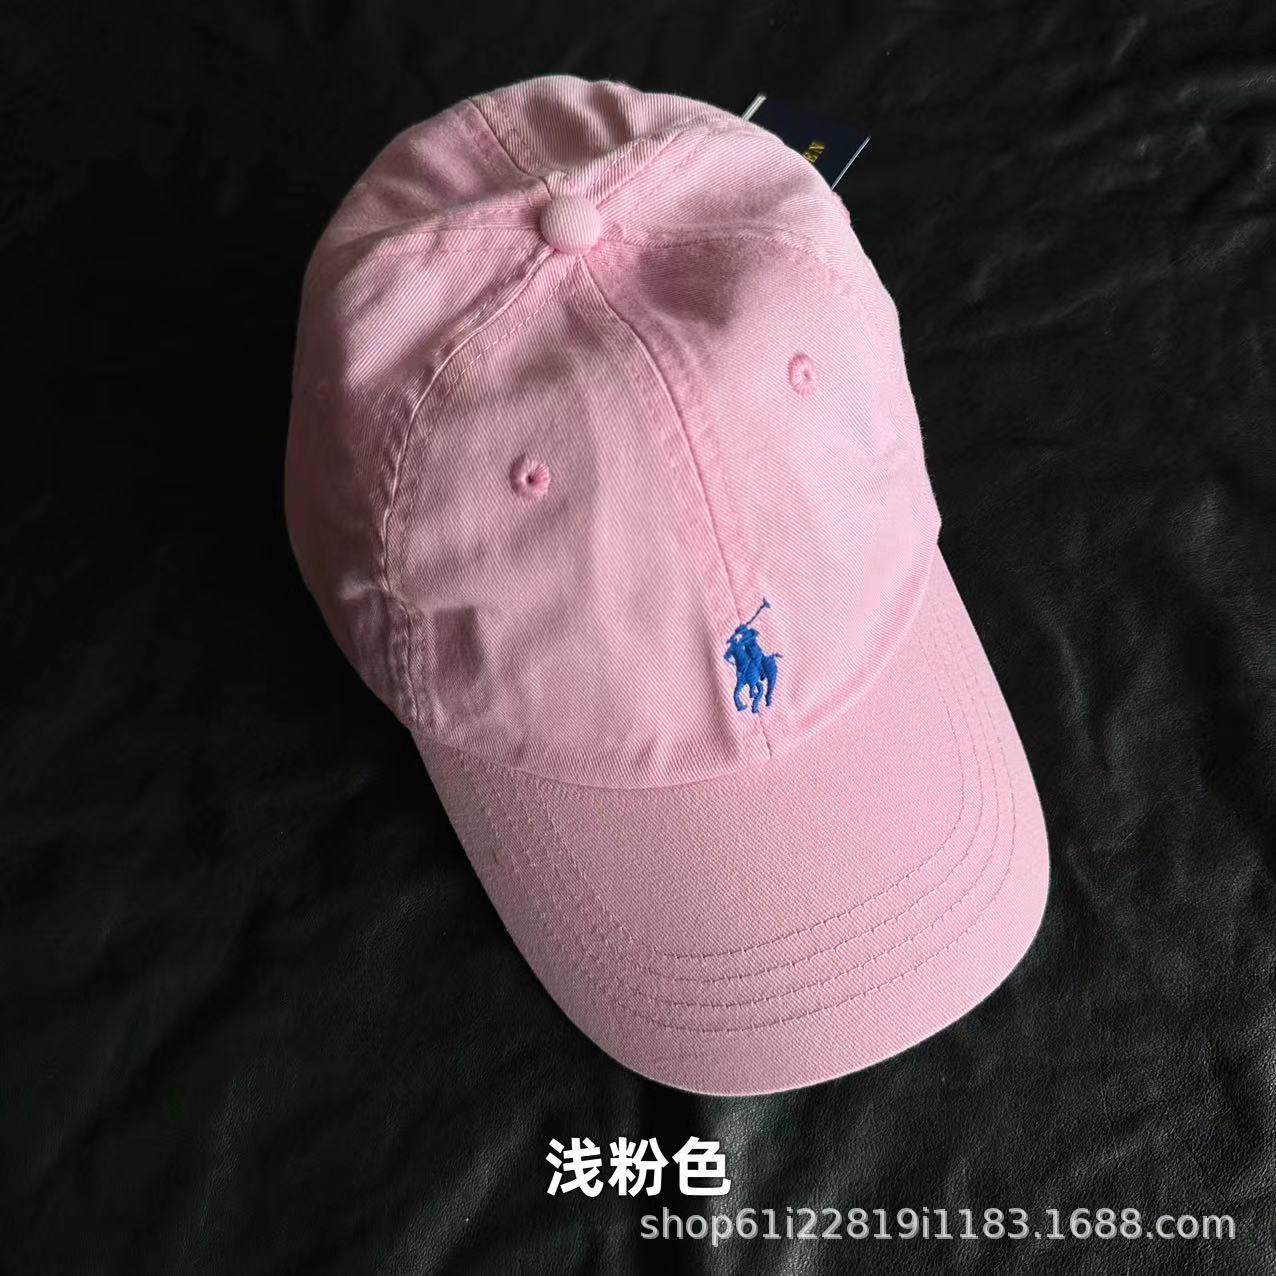 thumbnail for Original RL raff male and female couple cotton baseball cap polo sports embroidered pony logo sunshade classic trend duck